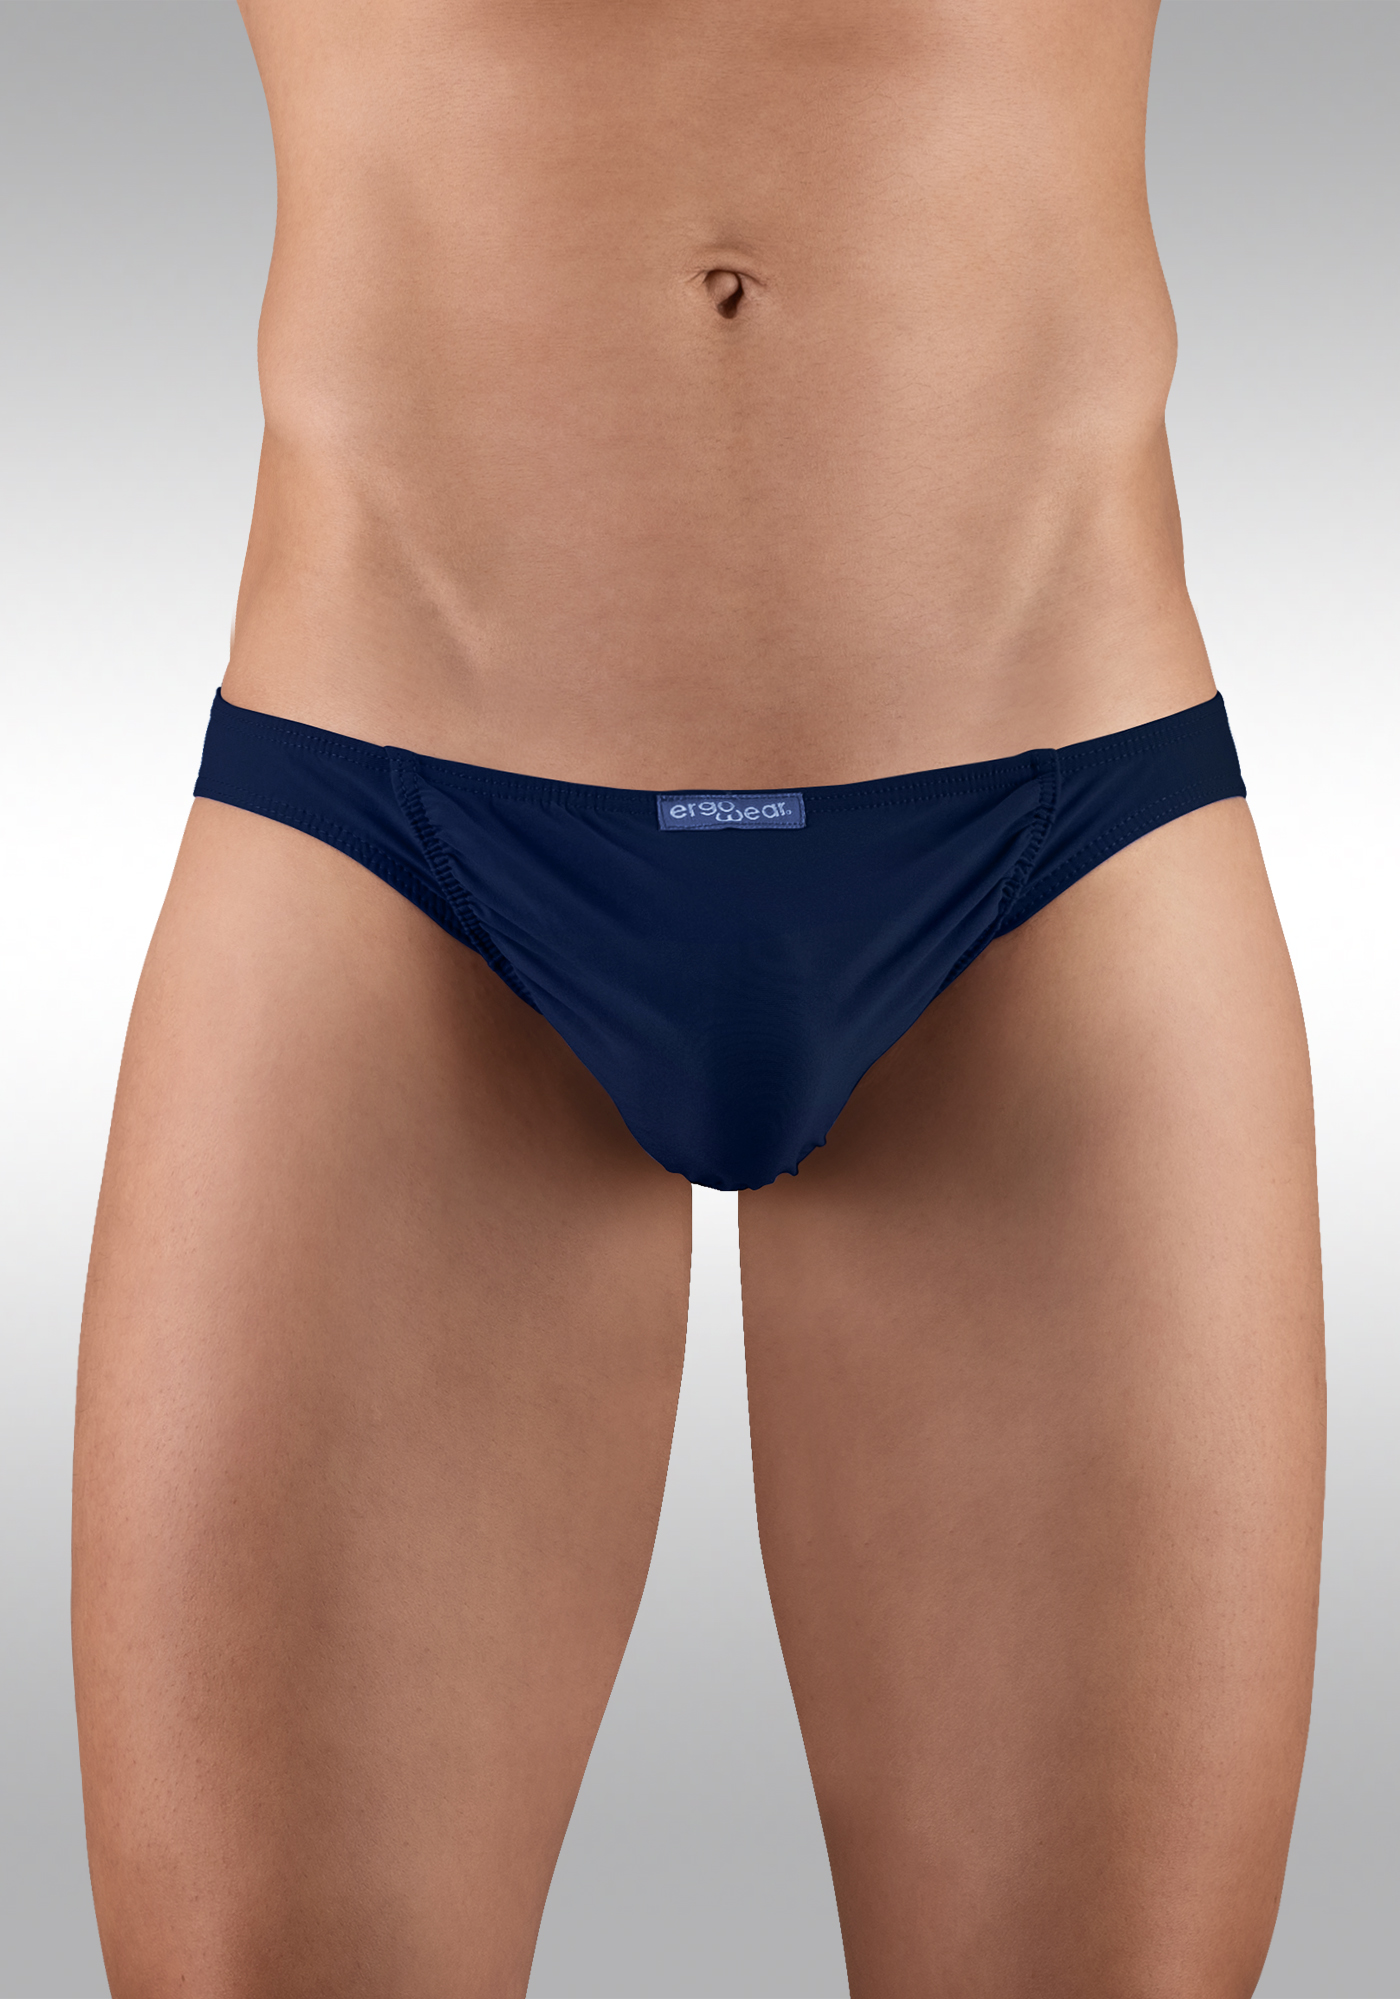 feel gr8 thong night blue front